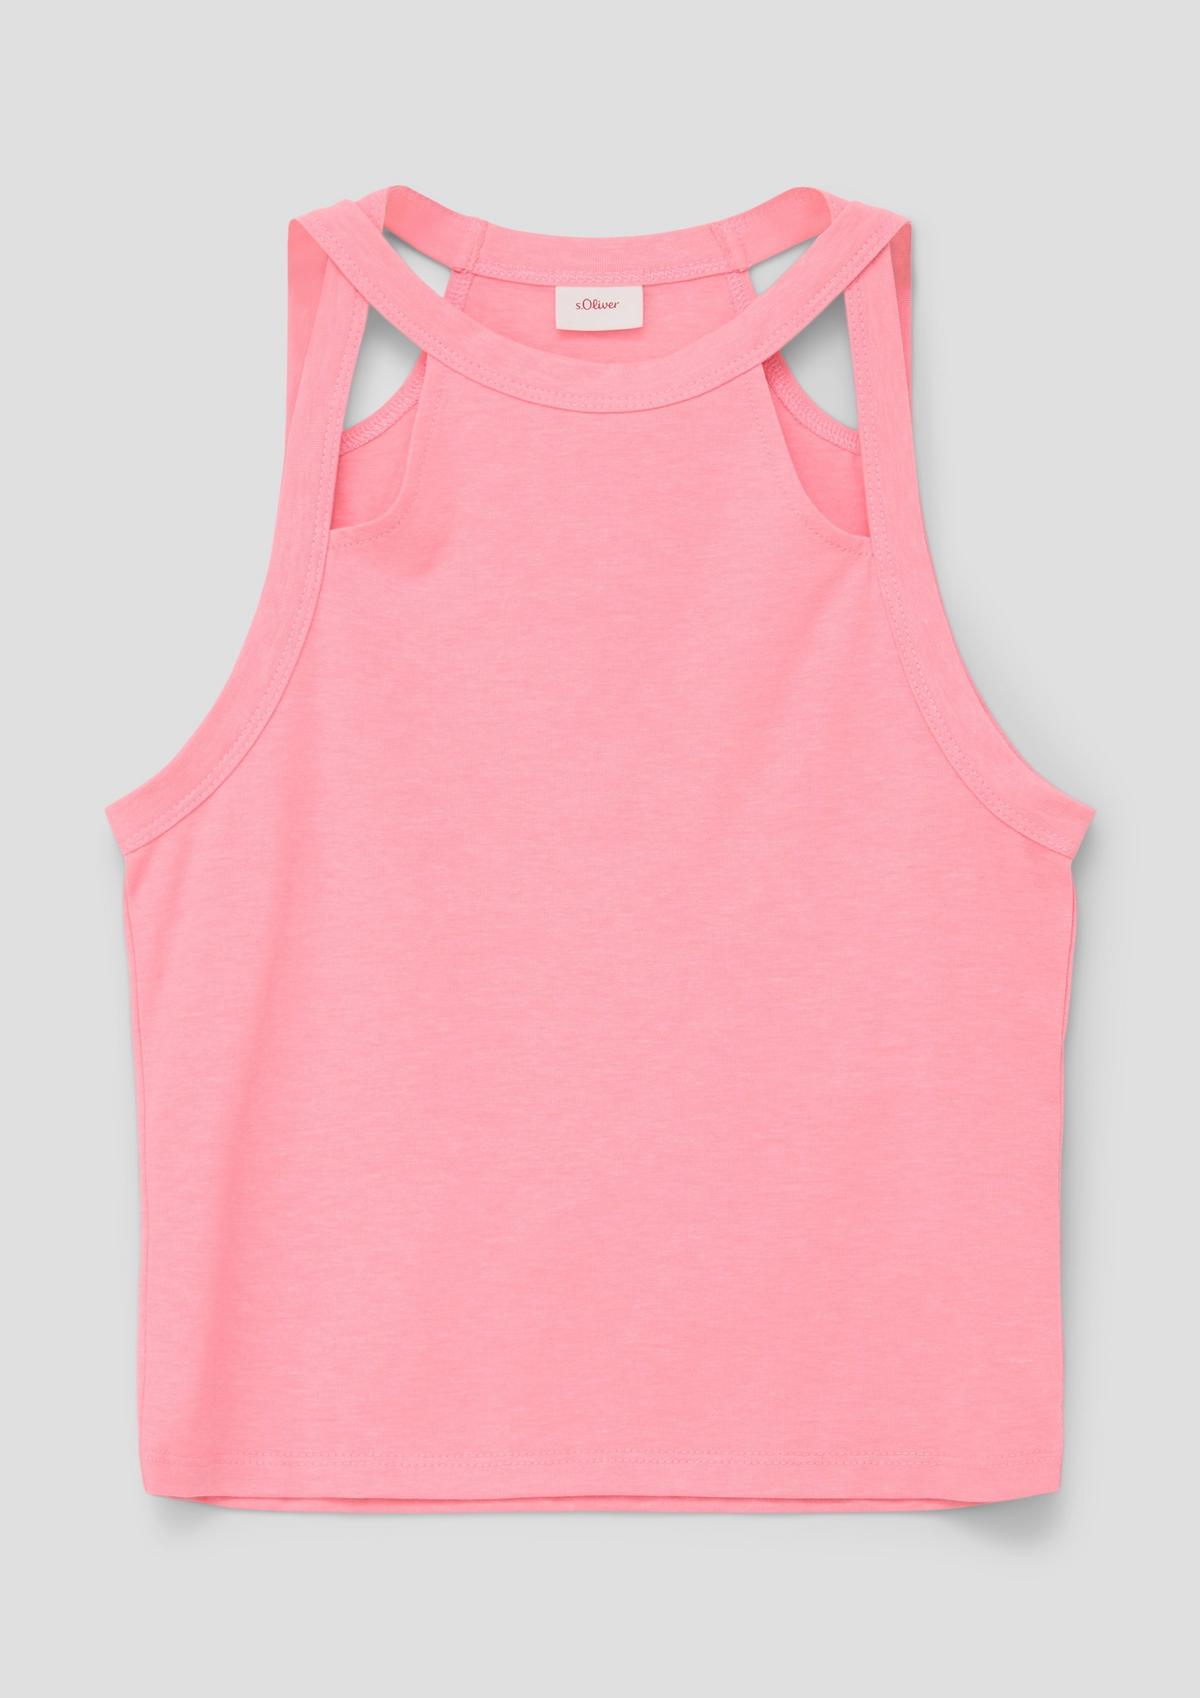 s.Oliver Sleeveless top with cut-out details